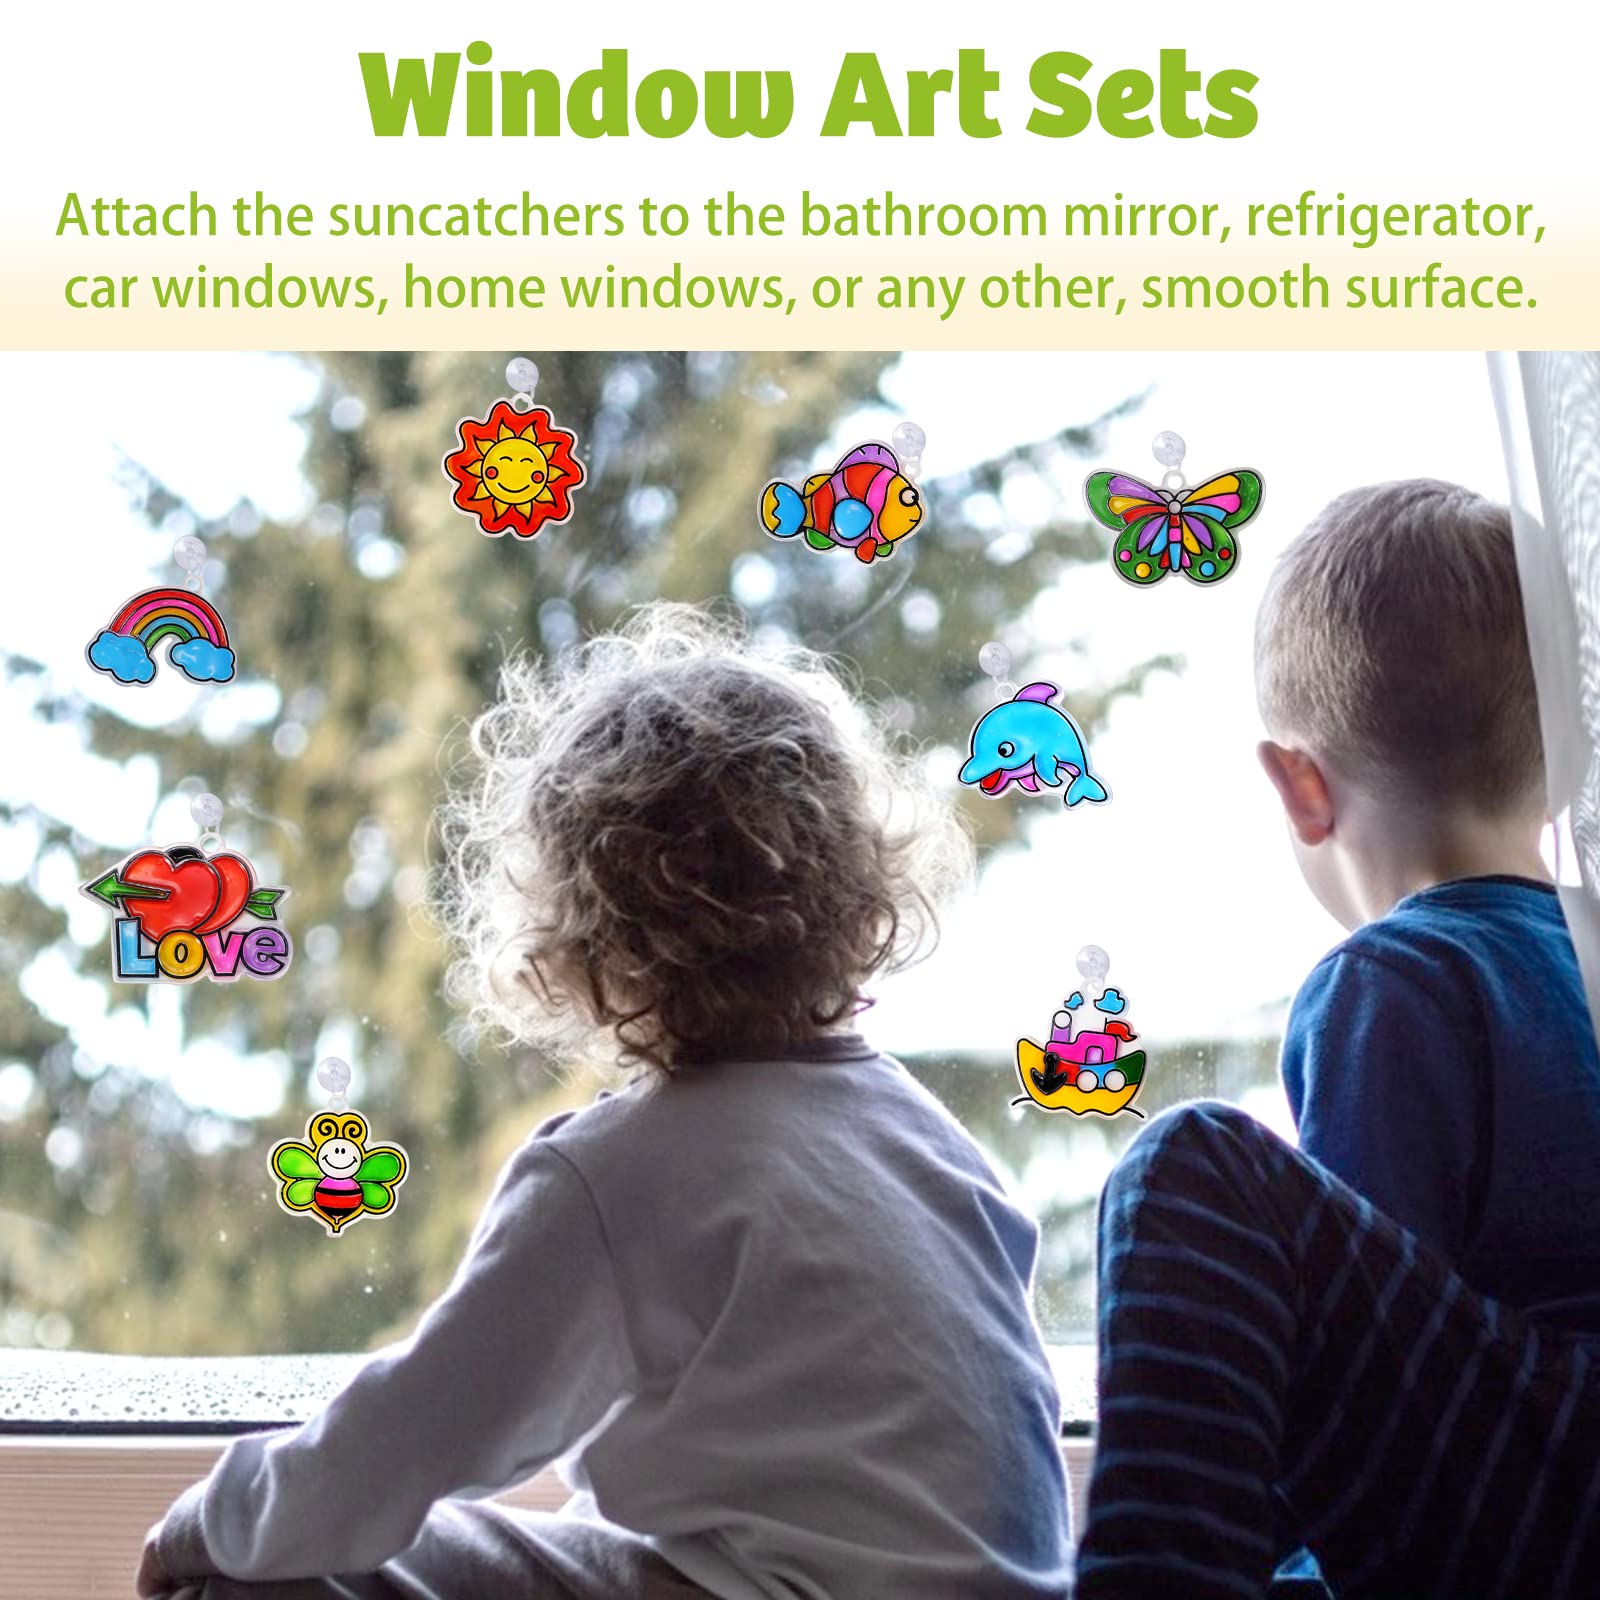 AVIASWIN Girls Toys Age 4-6-8 Window Art for Kids, Suncatchers Painting Kit, Arts and Crafts for Kids Ages 5 6 7 8 9 10, DIY Paint Activities Ideas, Birthday Gifts for 5 6 Year Old Boys